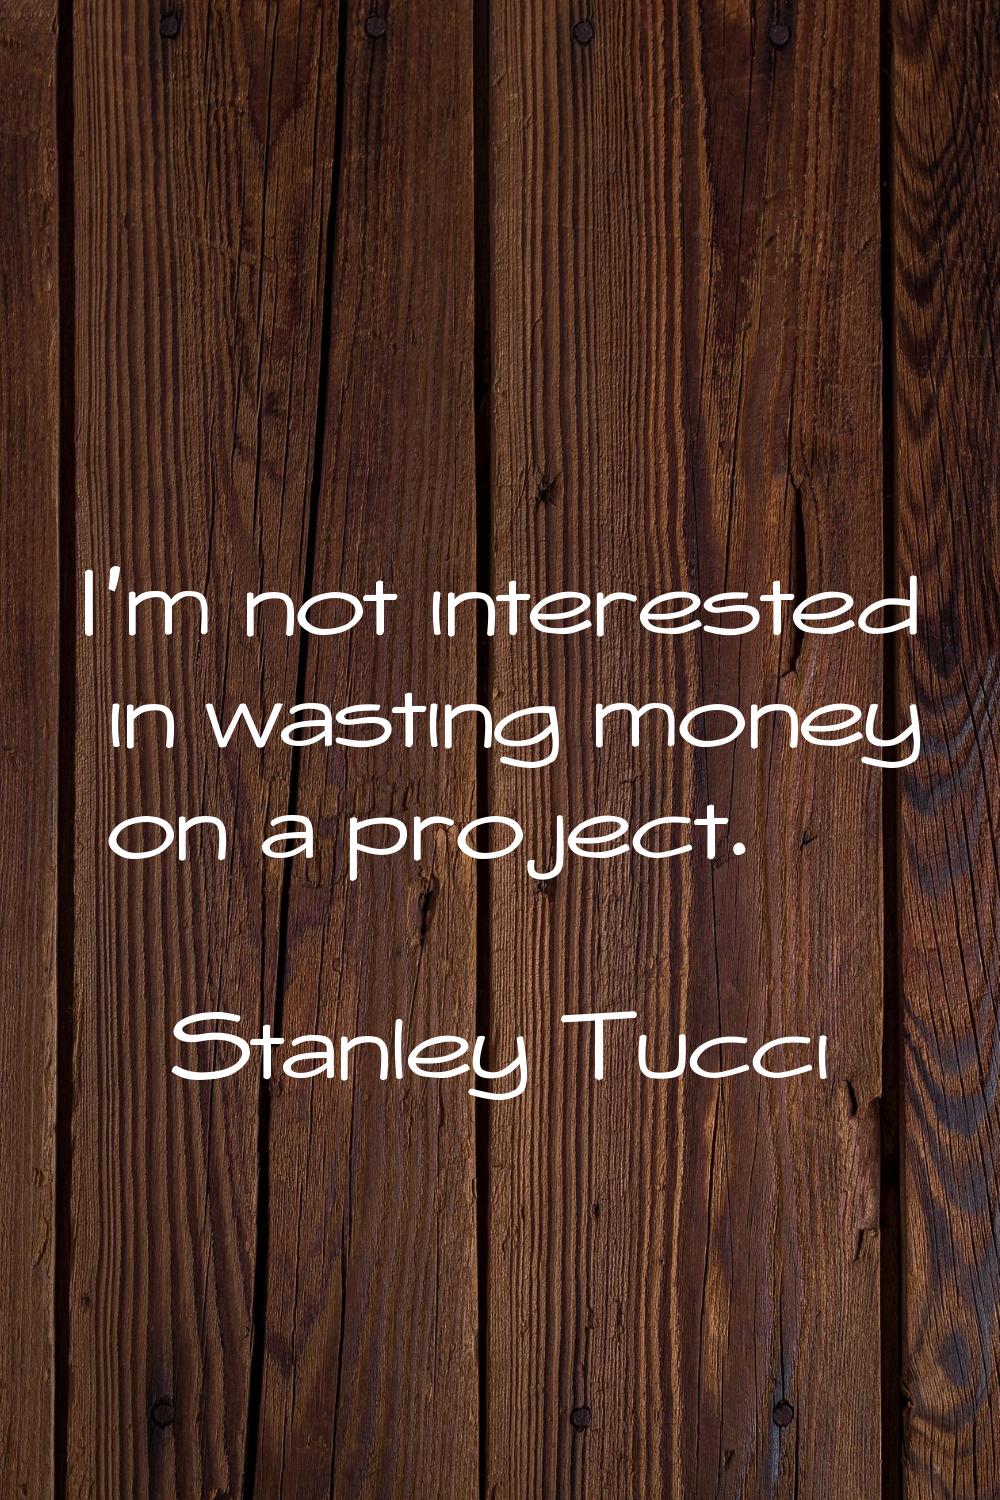 I'm not interested in wasting money on a project.